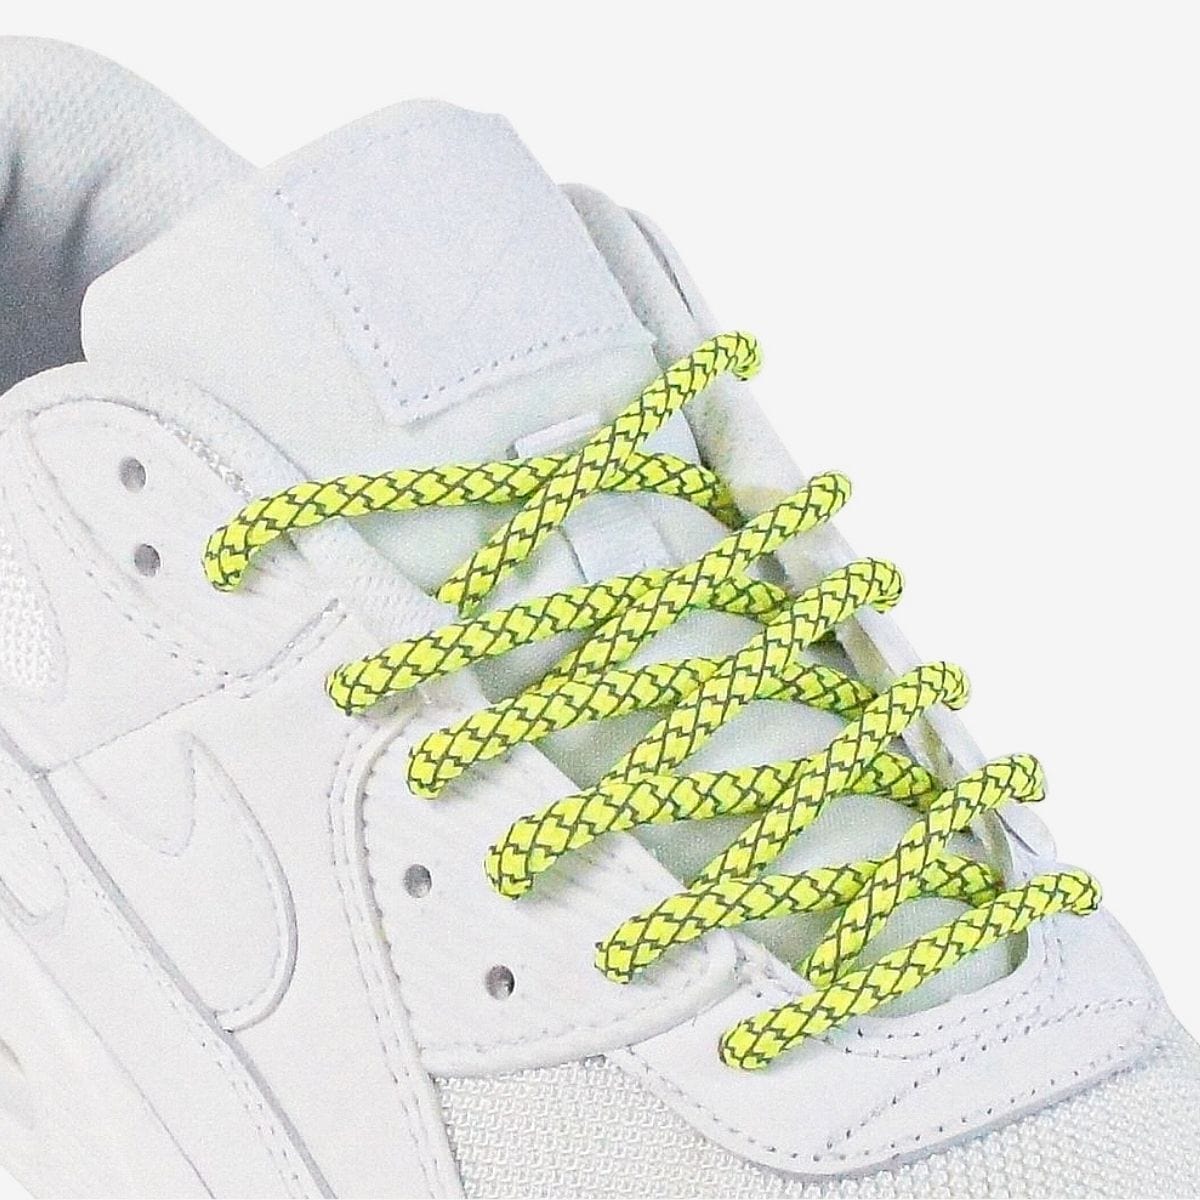 custom-color-shoelaces-on-white-sneakers-with-reflective-fluorescent-yellow-laces